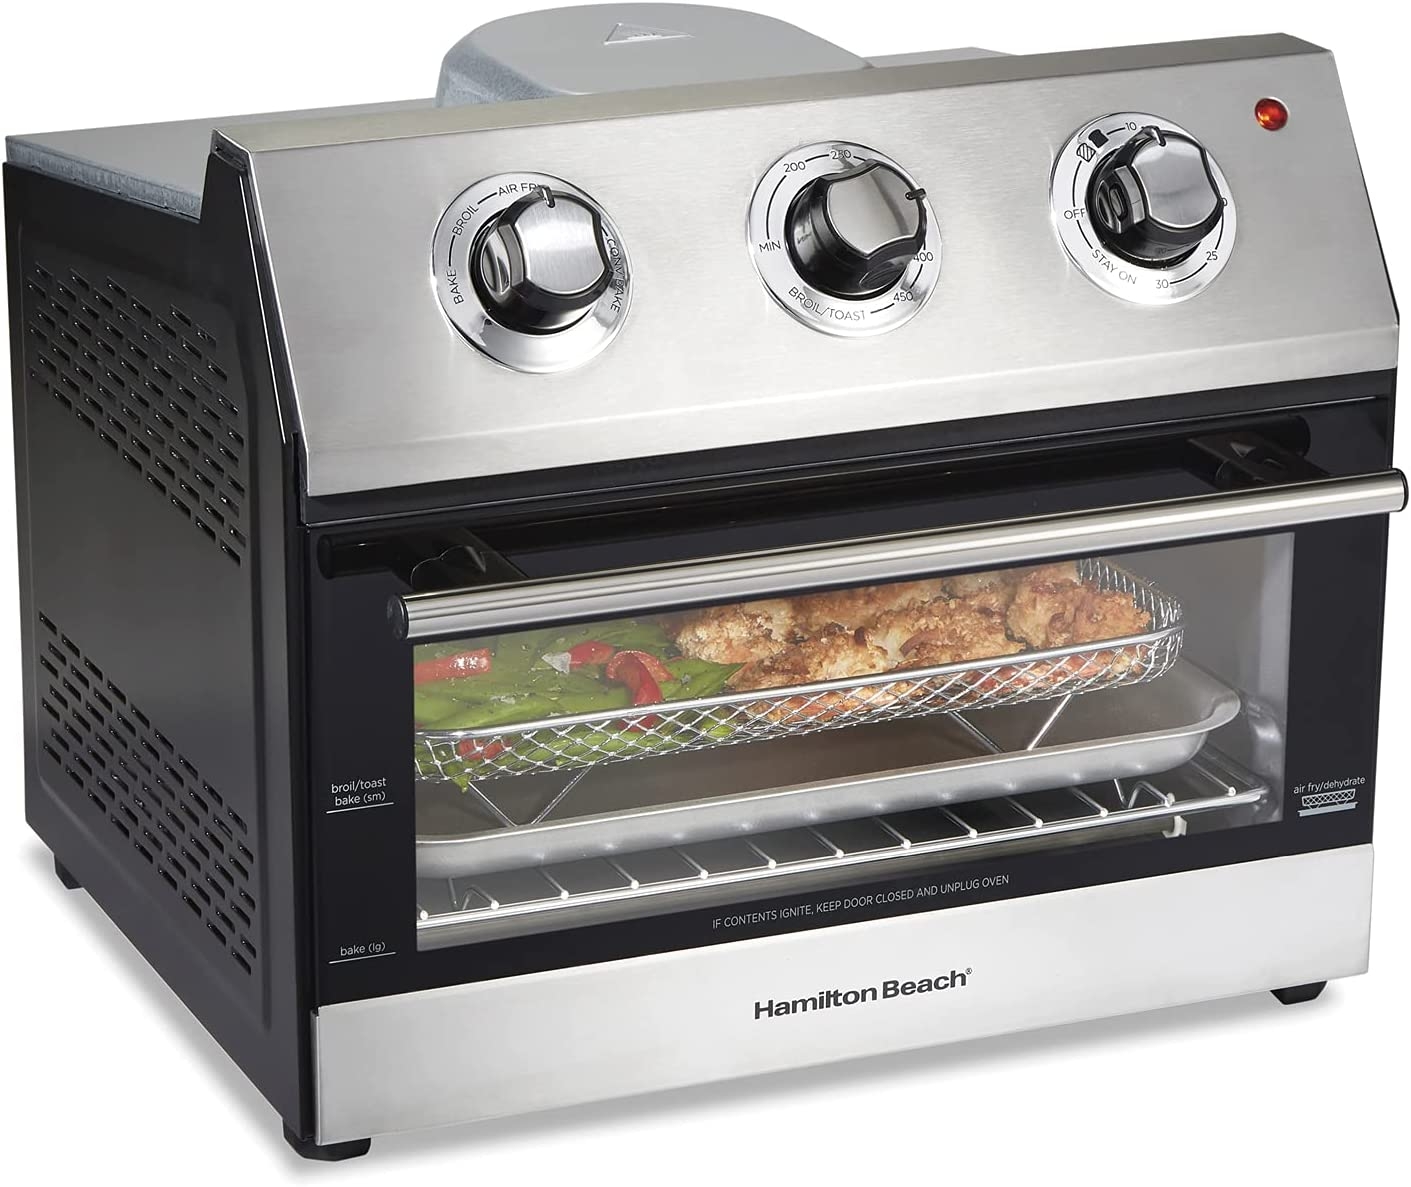 Hamilton Beach Air Fryer Countertop Toaster Oven, Includes Bake, Broil, and Toast, Fits 12” Pizza, 1800 Watts, 10 Cooking